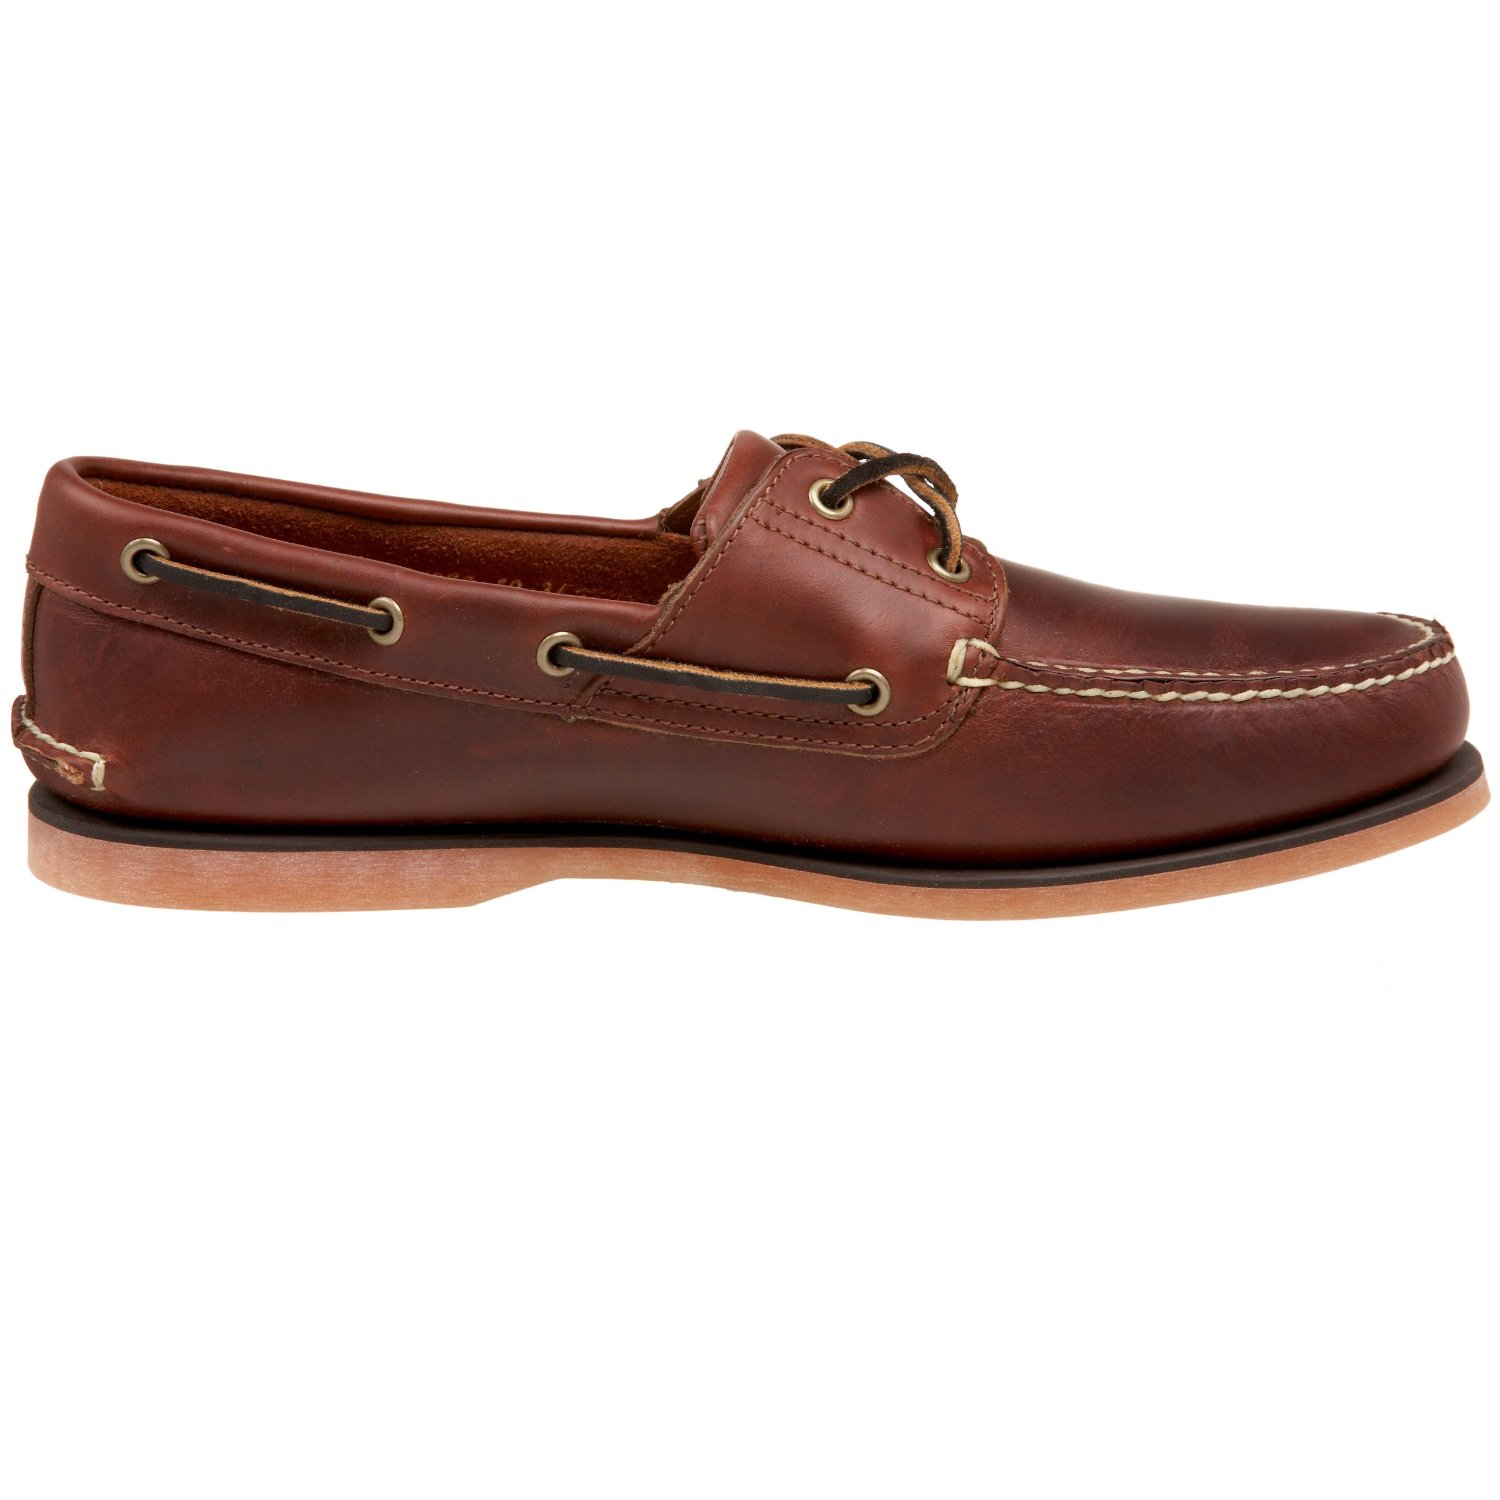 Pro Collection: Timberland Men's Classic Boat Shoe